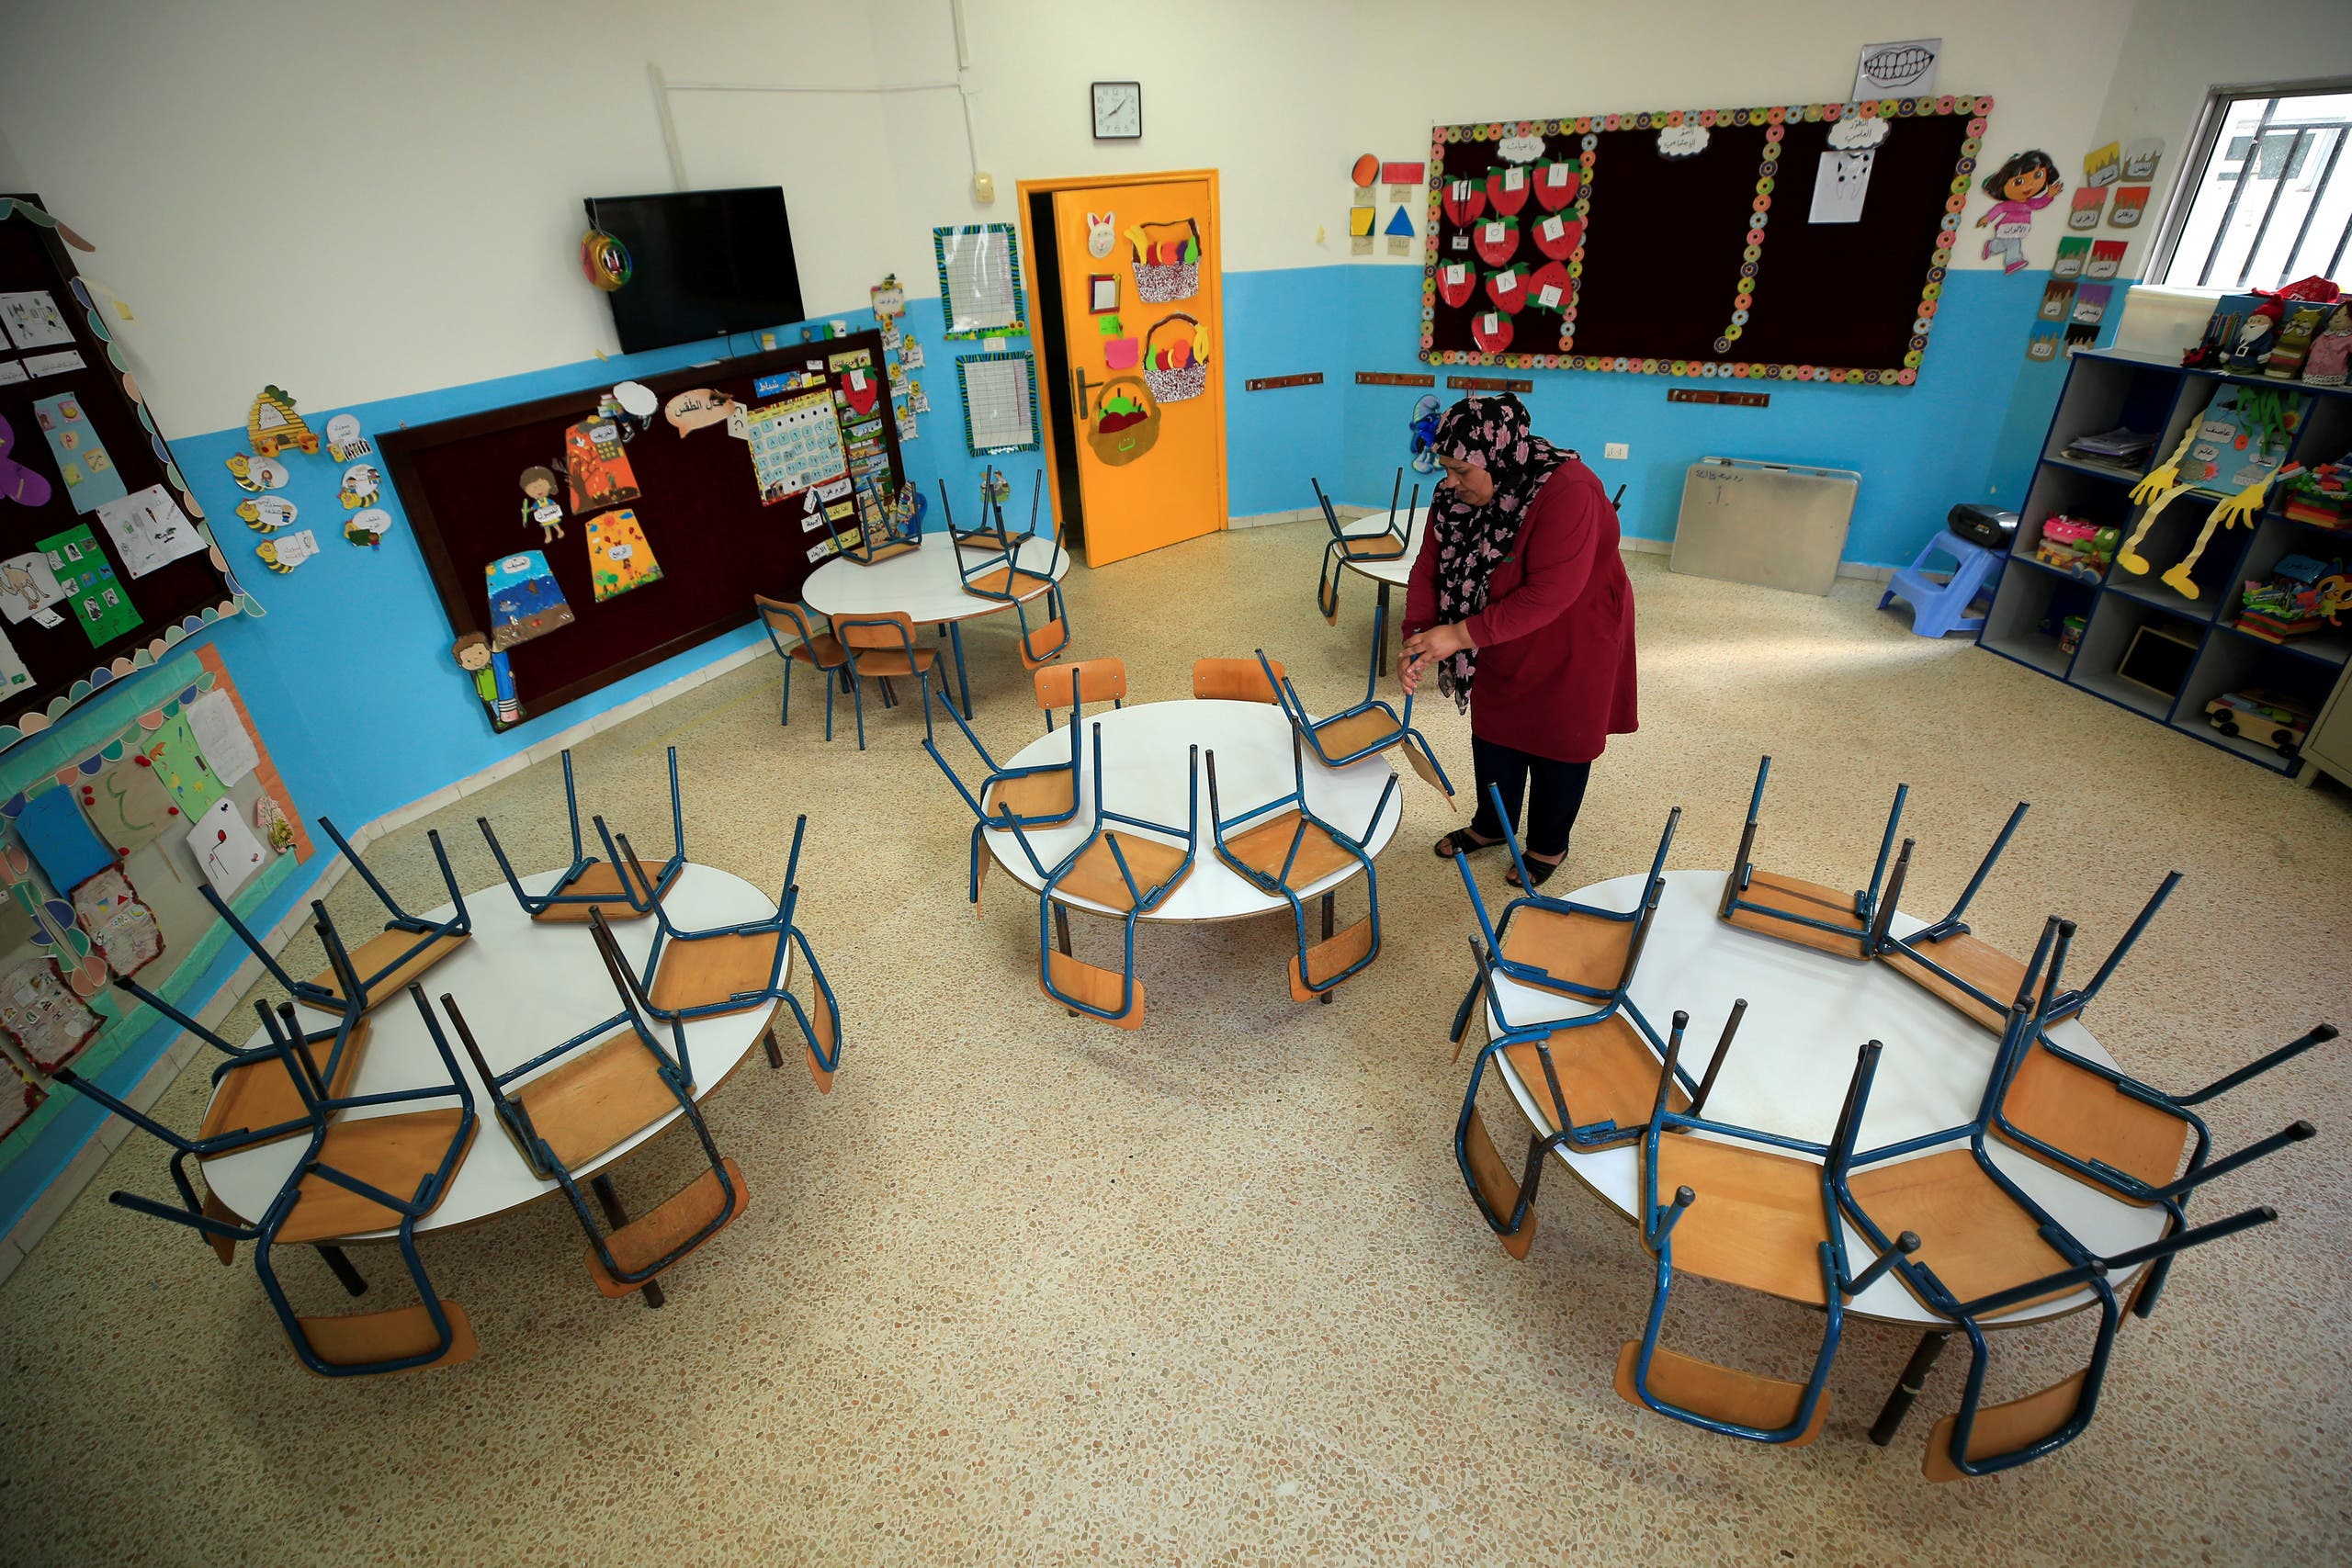 A worker cleans an empty classroom at a school, as Lebanon's education system is in limbo with multiple challenges, in Sidon Lebanon, May 29, 2020. (Reuters)